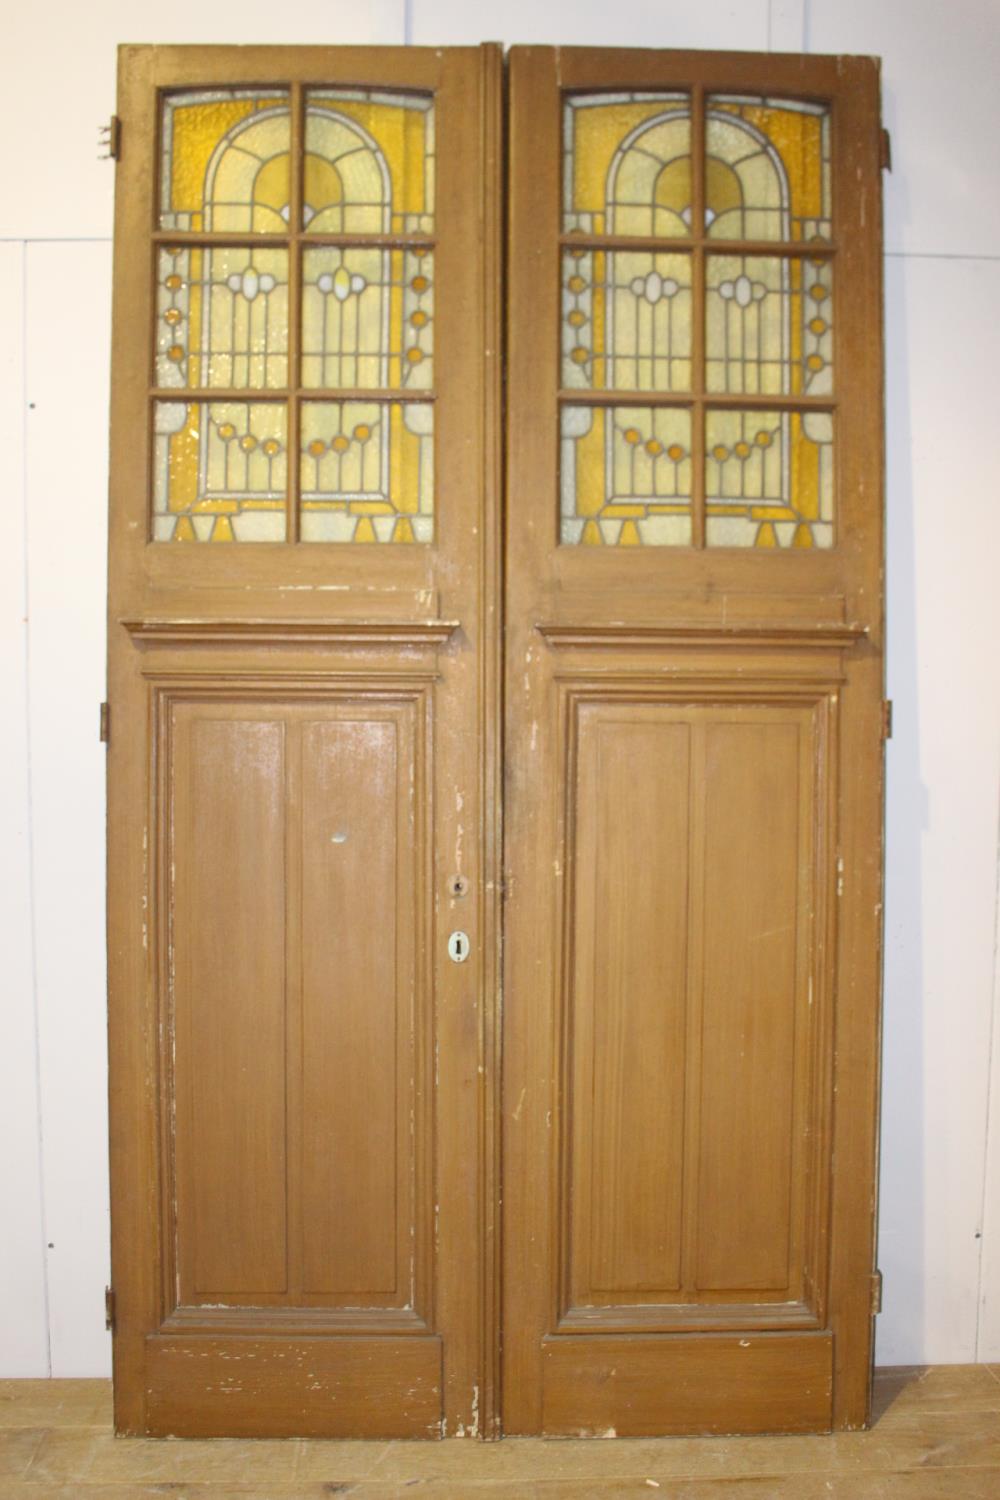 Pair of painted wooden doors with stain glass inserts. - Image 4 of 4